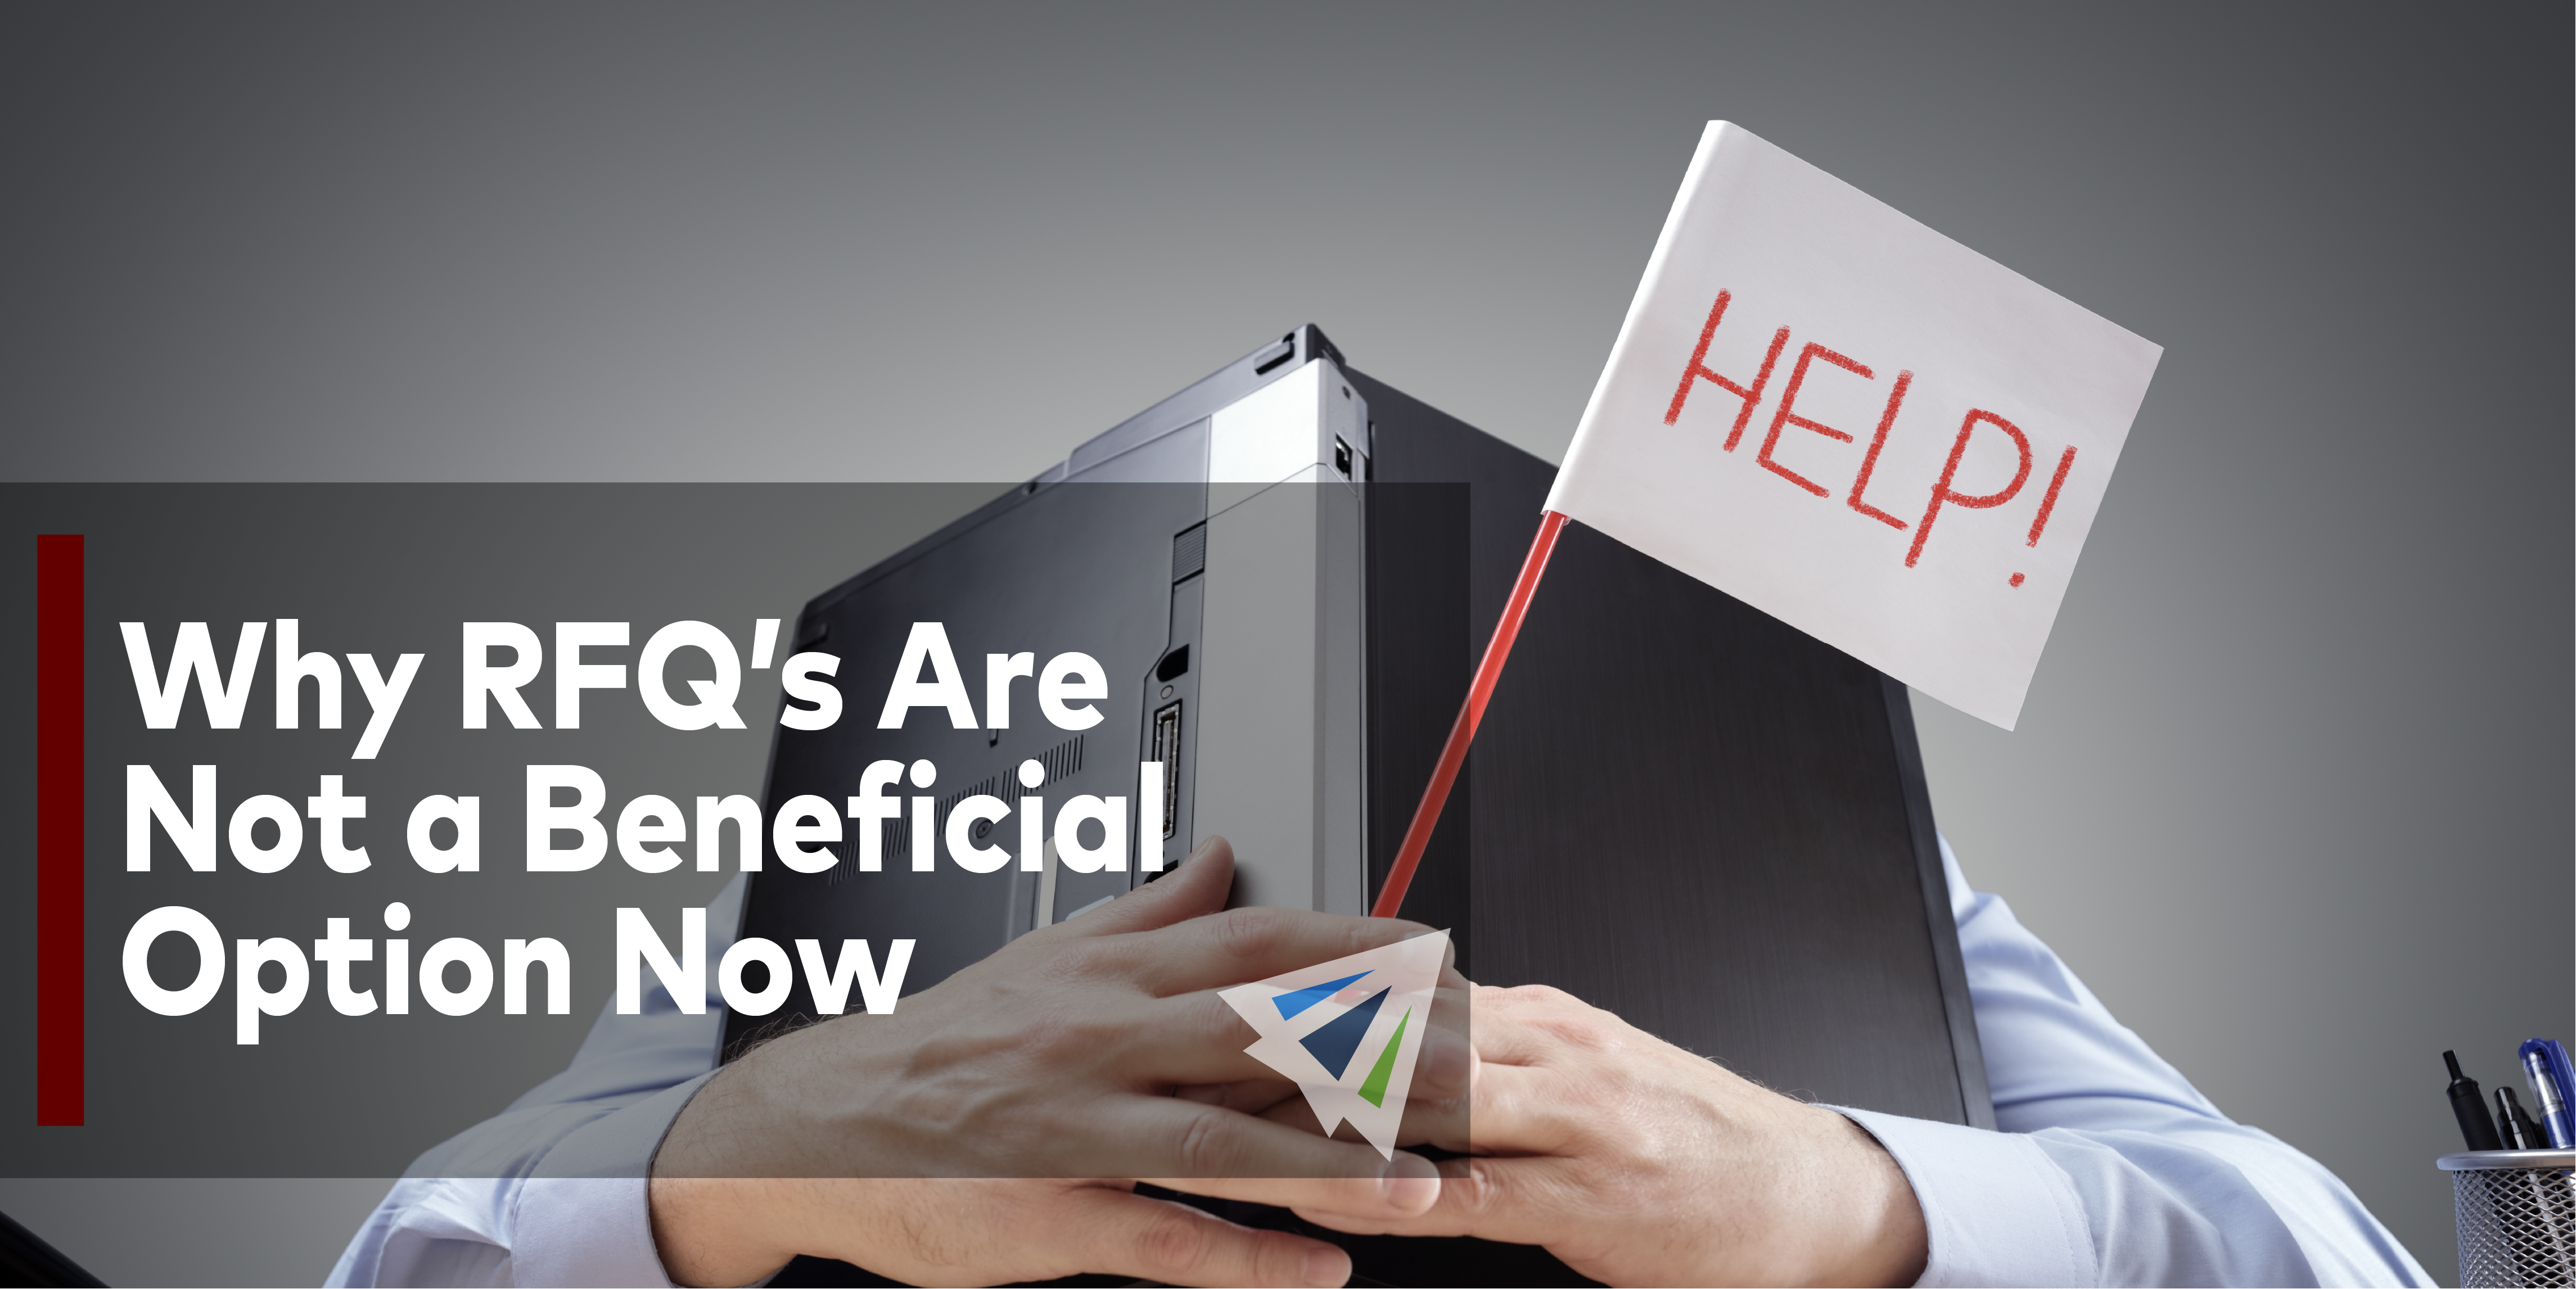 Why RFQ’s Are Not a Beneficial Option Now